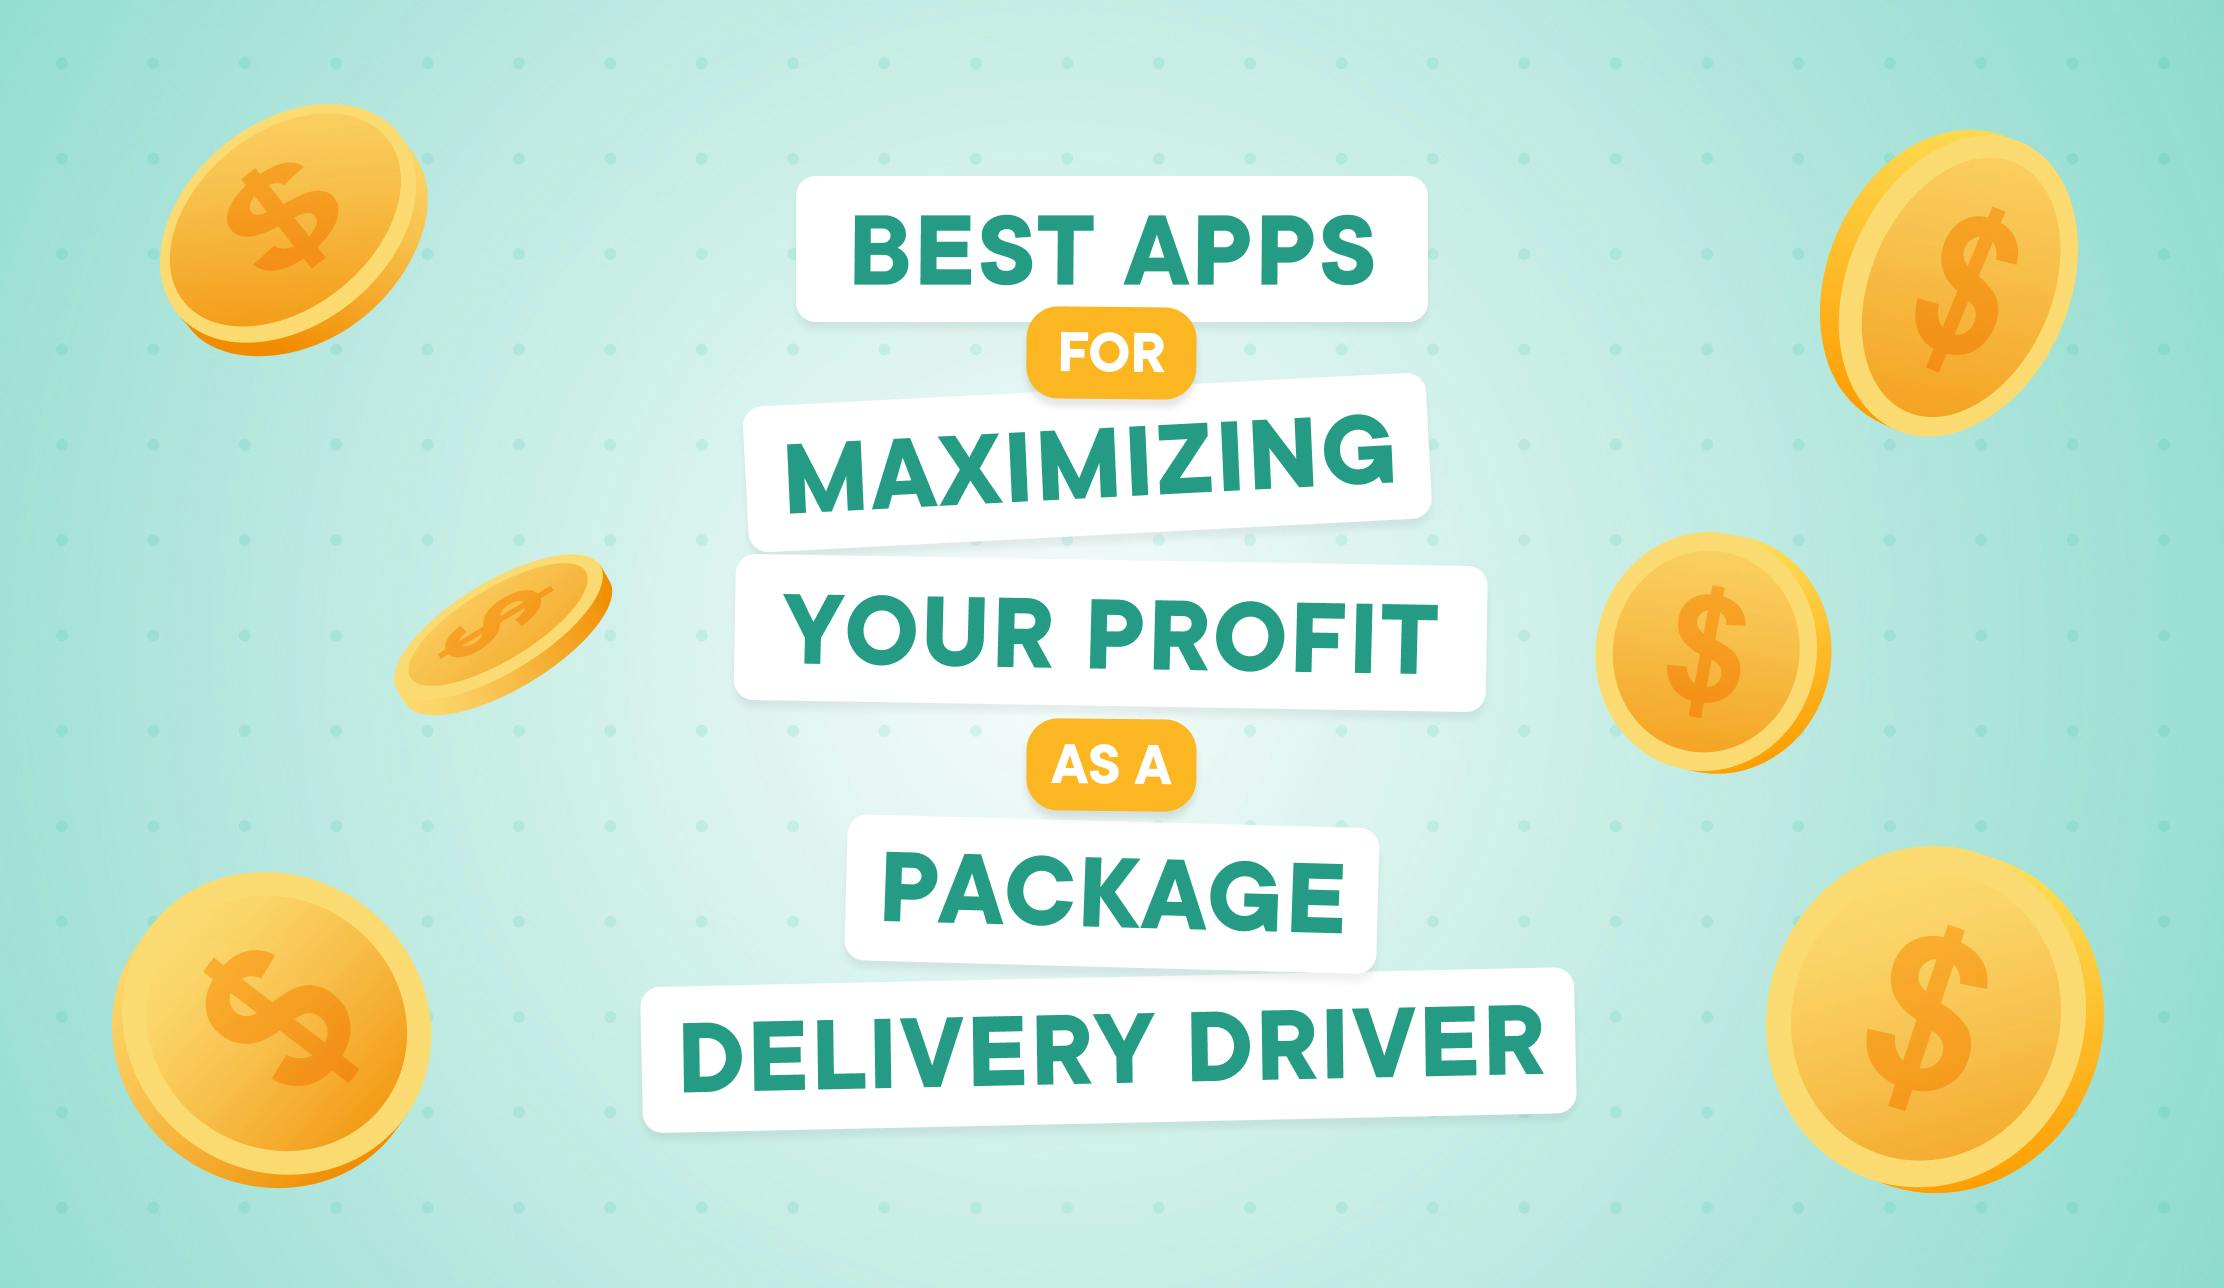 9 Best Apps for Maximizing Your Profit as a Package Delivery Driver